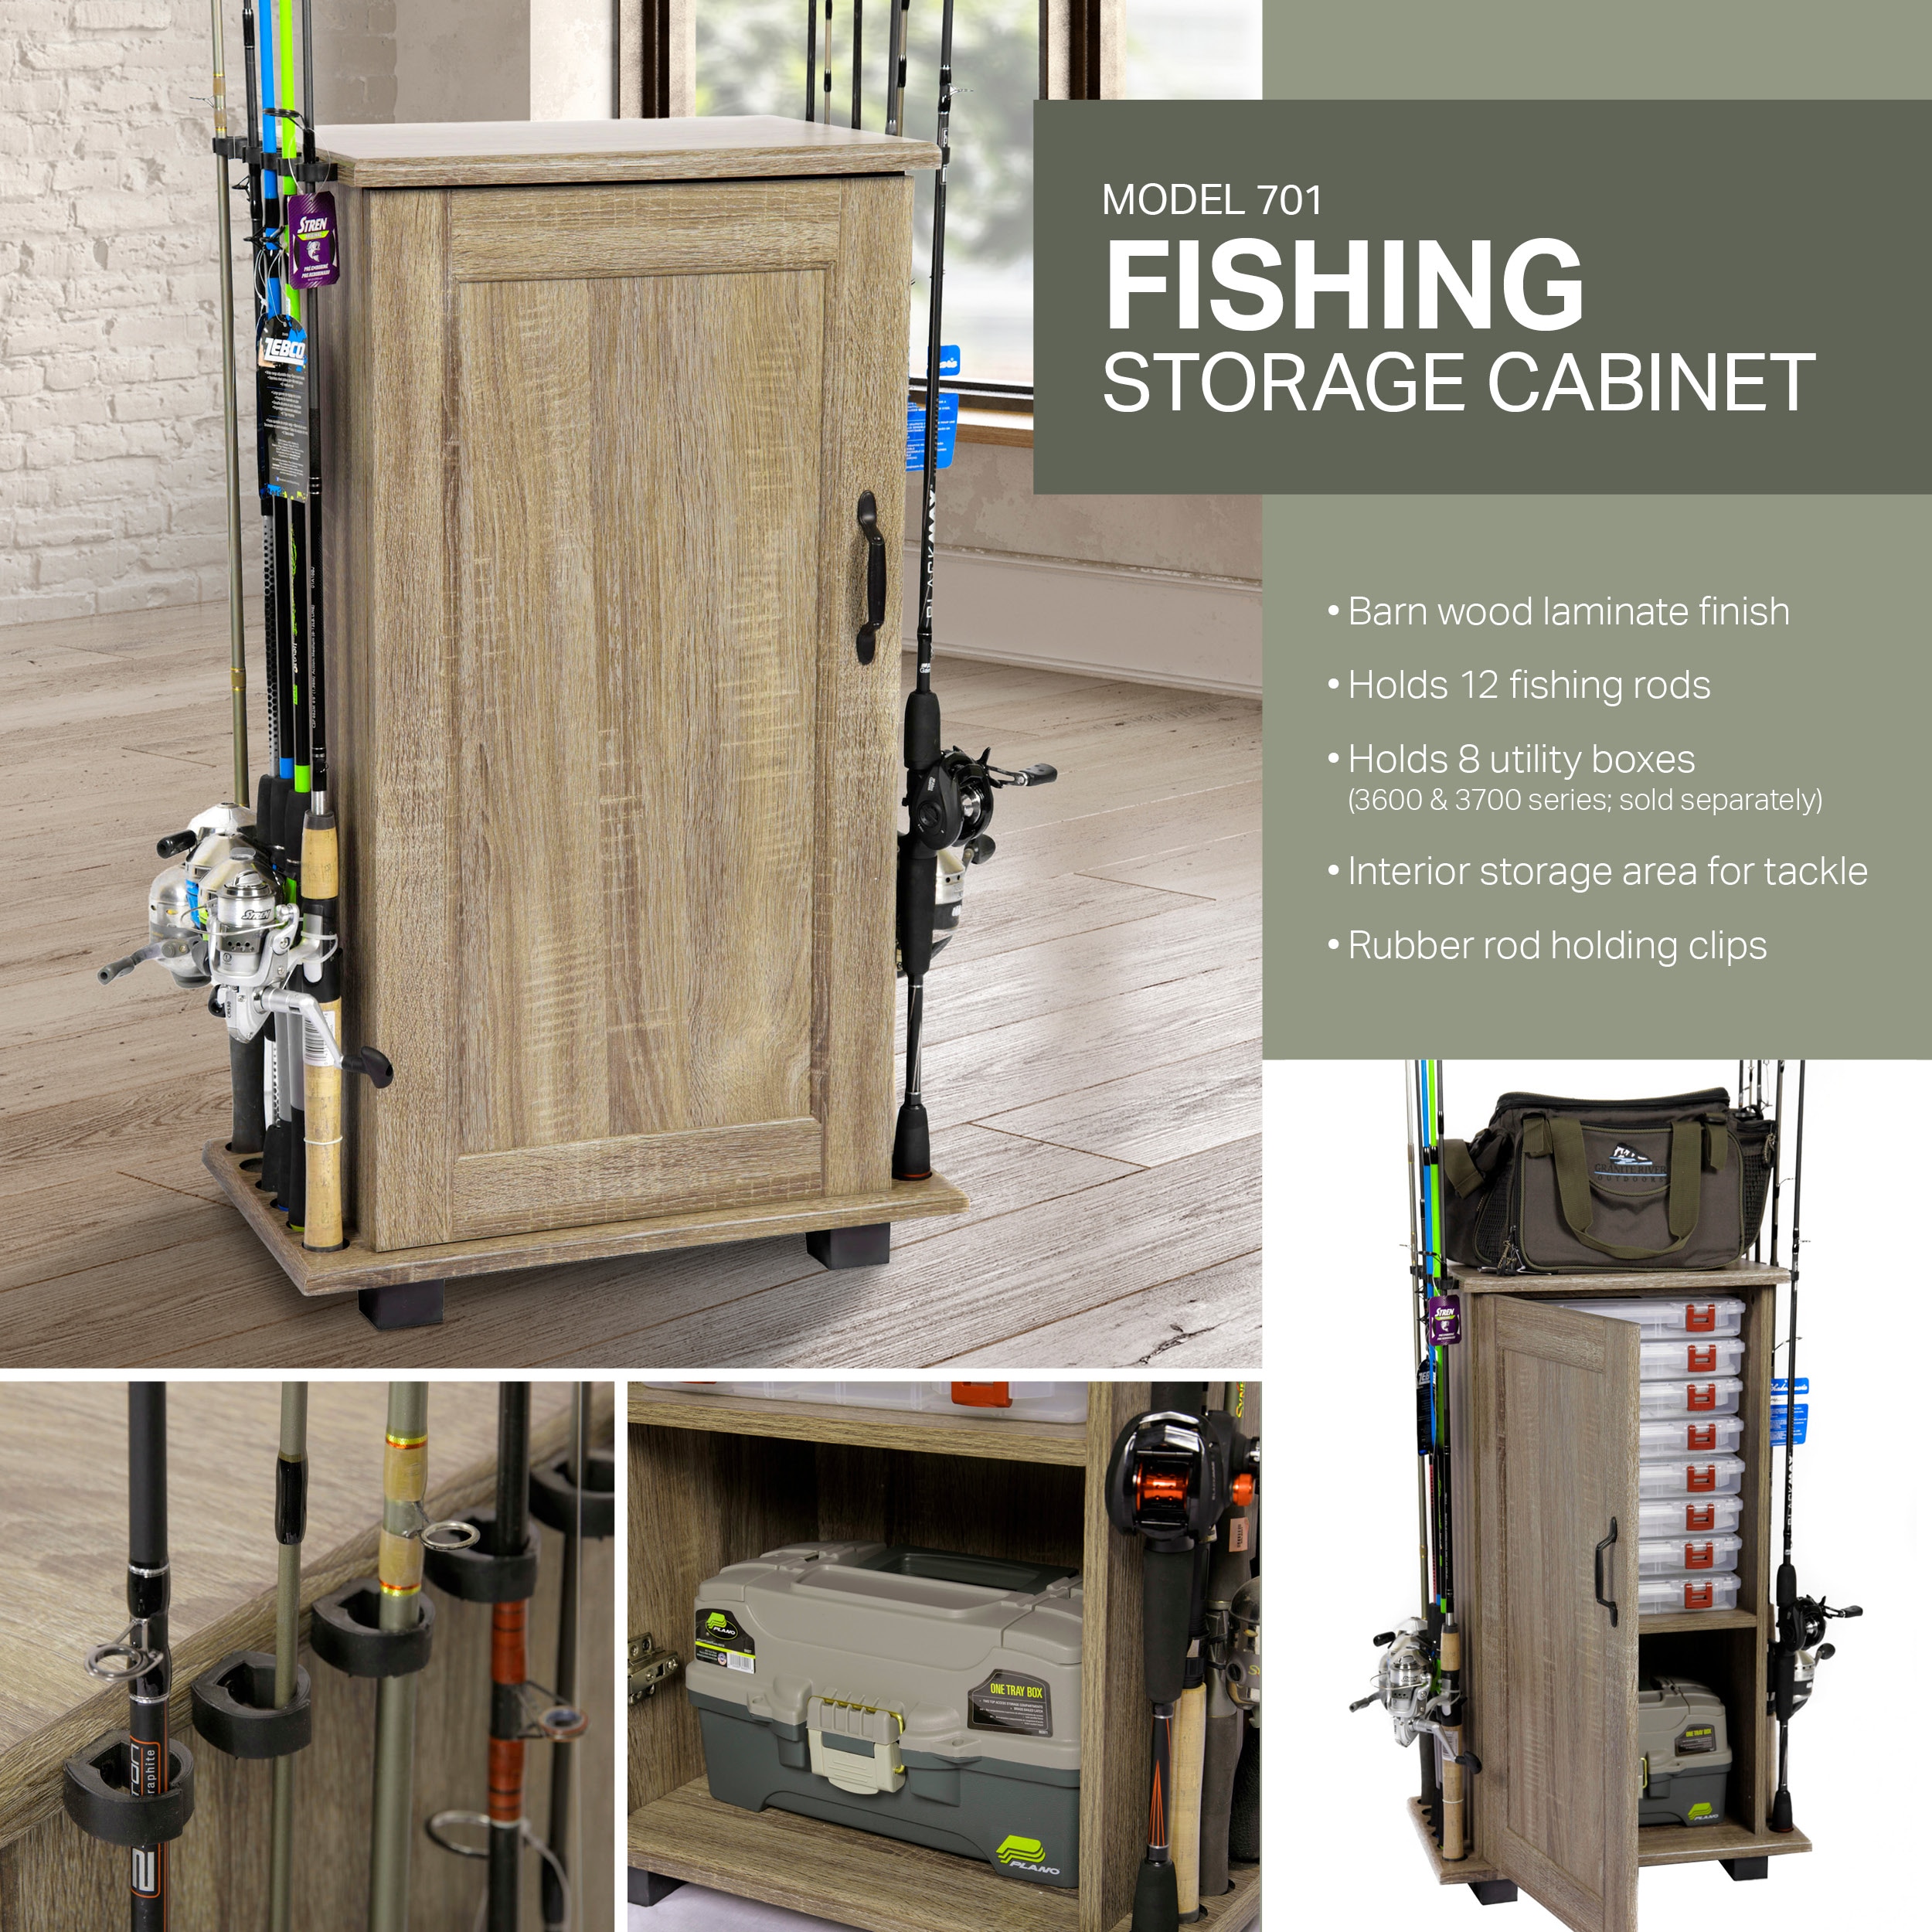 OSHOME Fishing Storage Collection Wood Fishing Storage Cabinet in